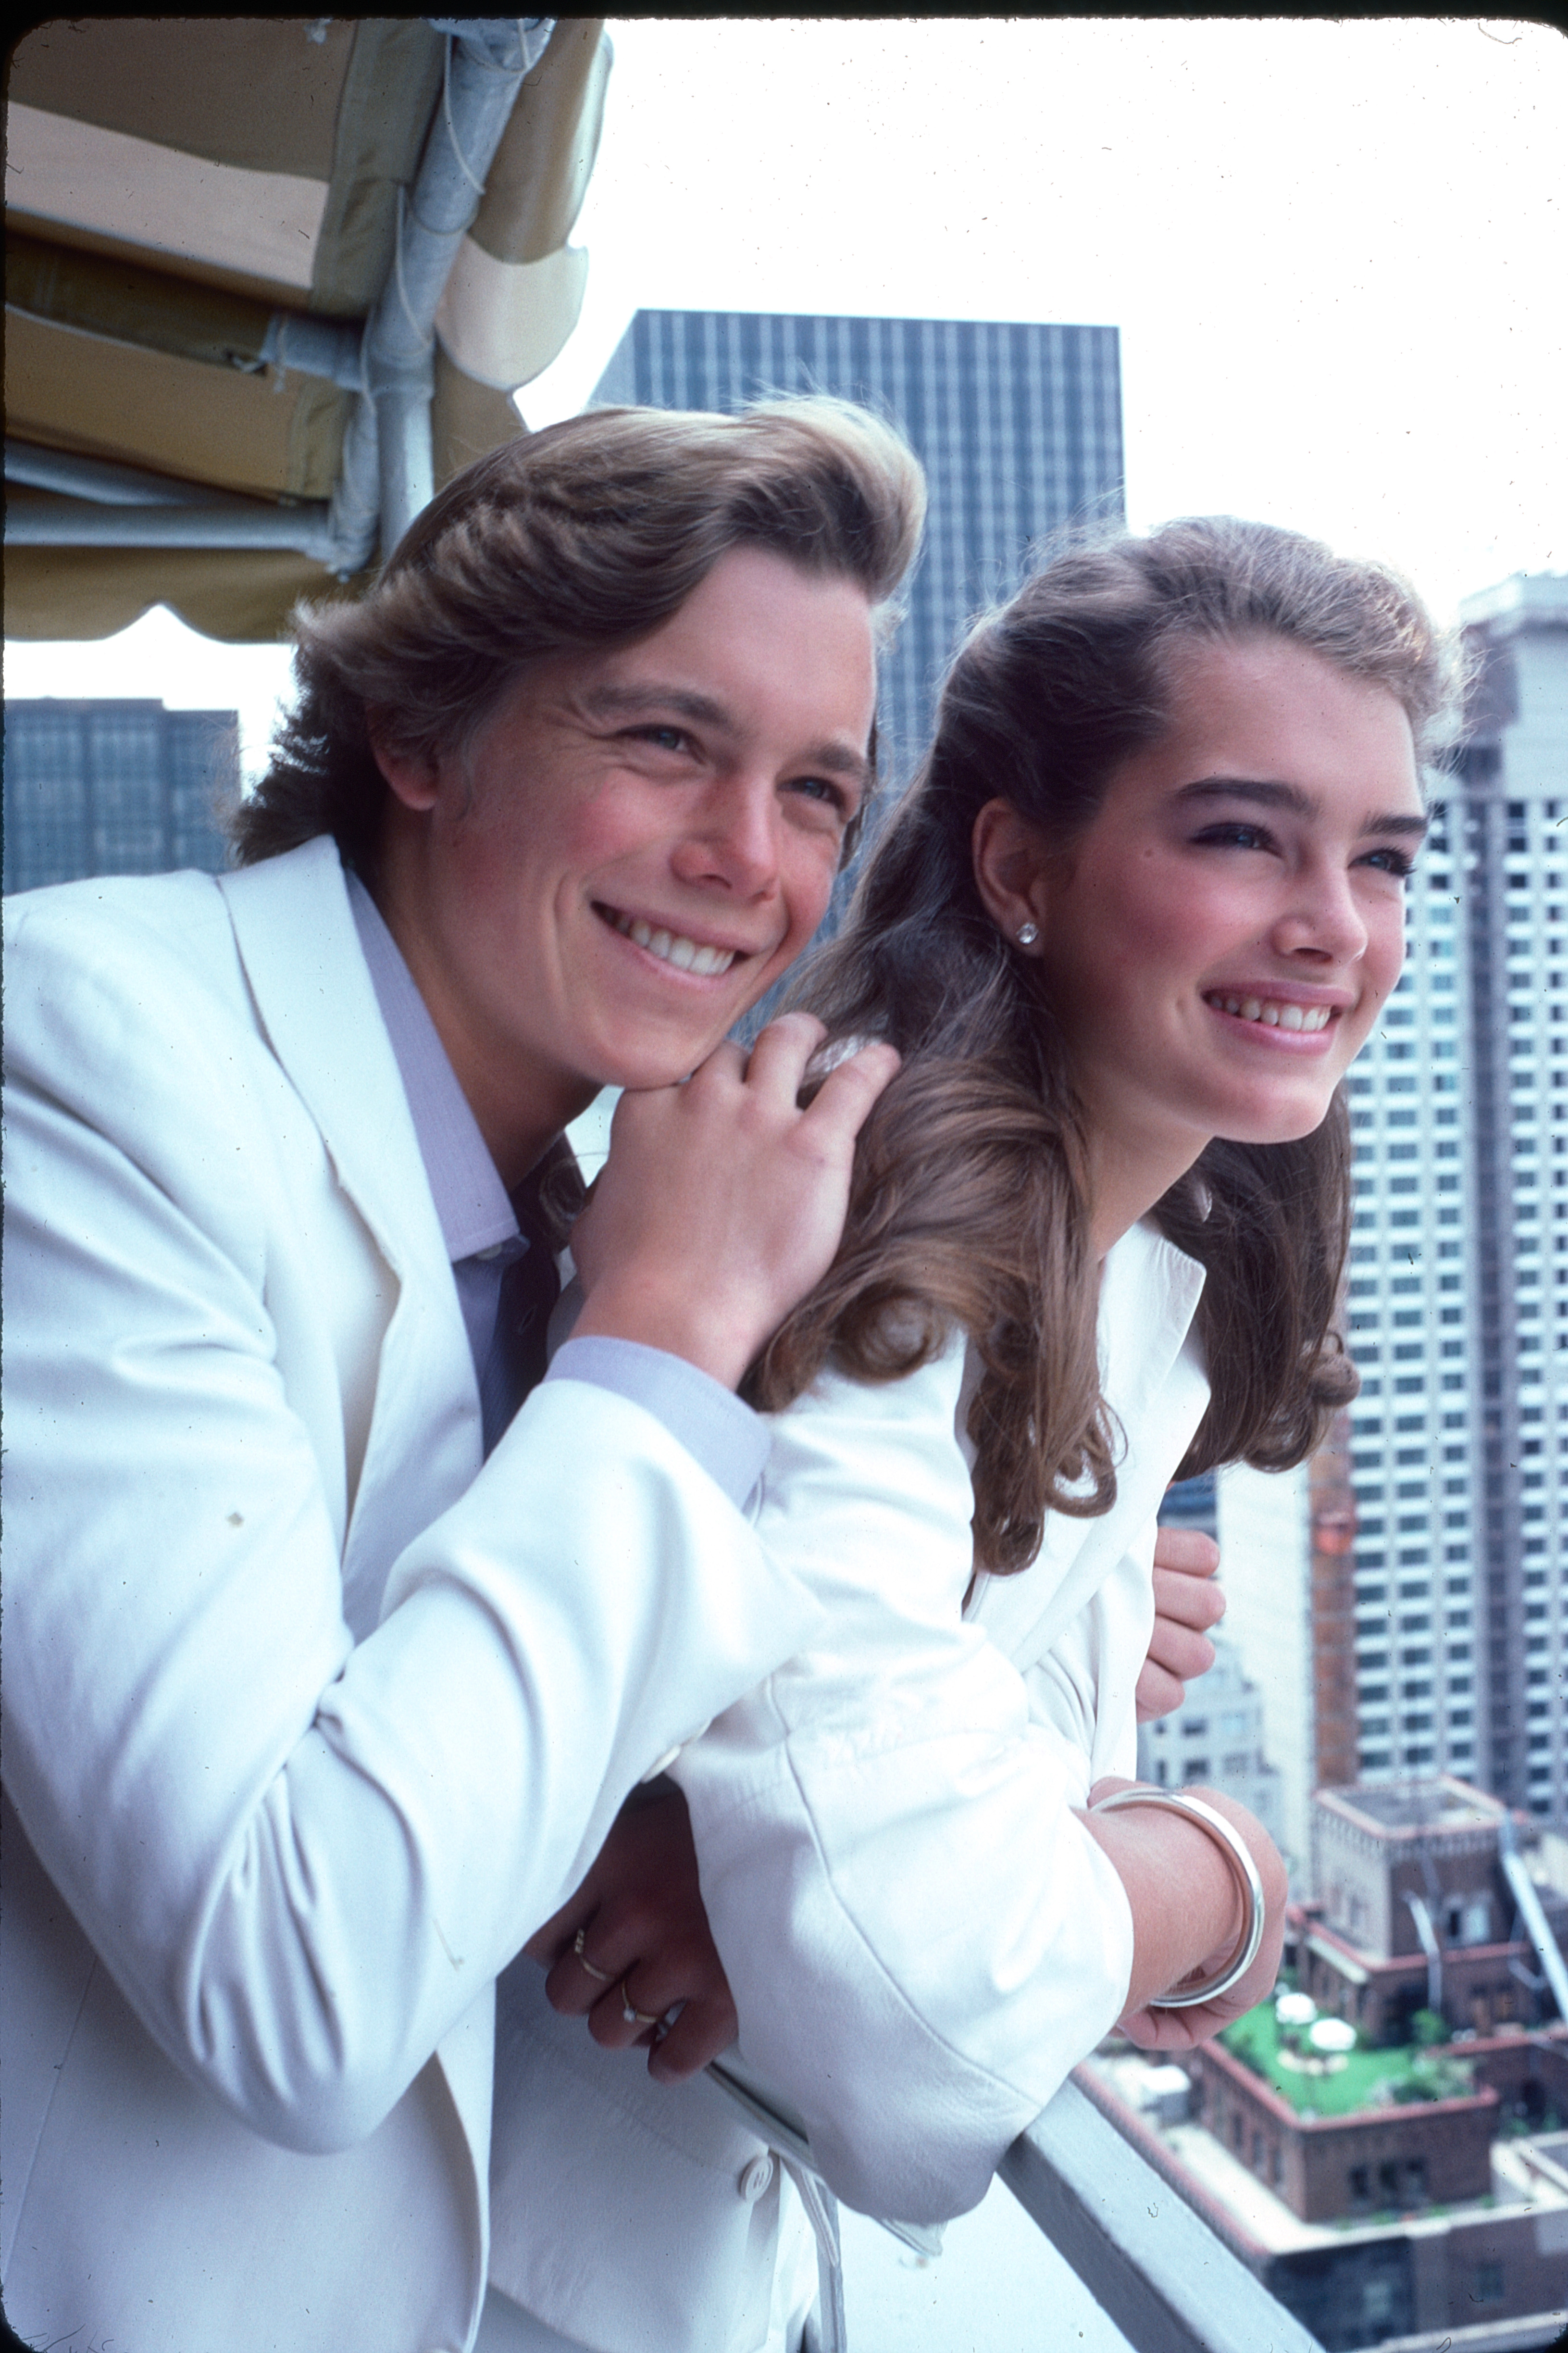 Christopher Atkins et Brooke Shields à New York, vers 1980. | Source : Getty Images